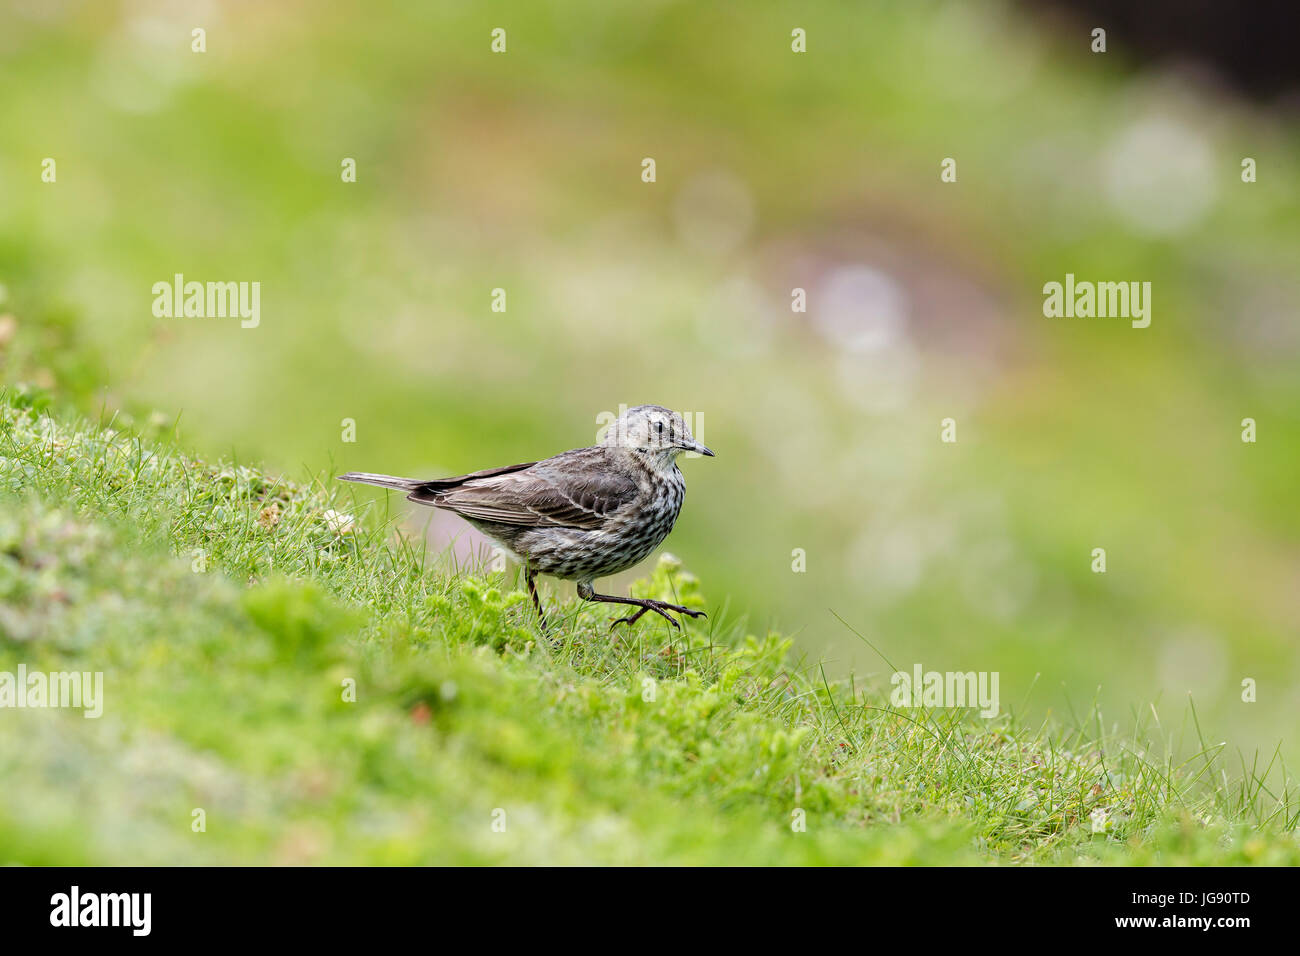 A rock pipit (Anthus spinoletta) walks on a grassy slope on the cliffs of Skokholm Island Pembrokeshire Wales UK Stock Photo